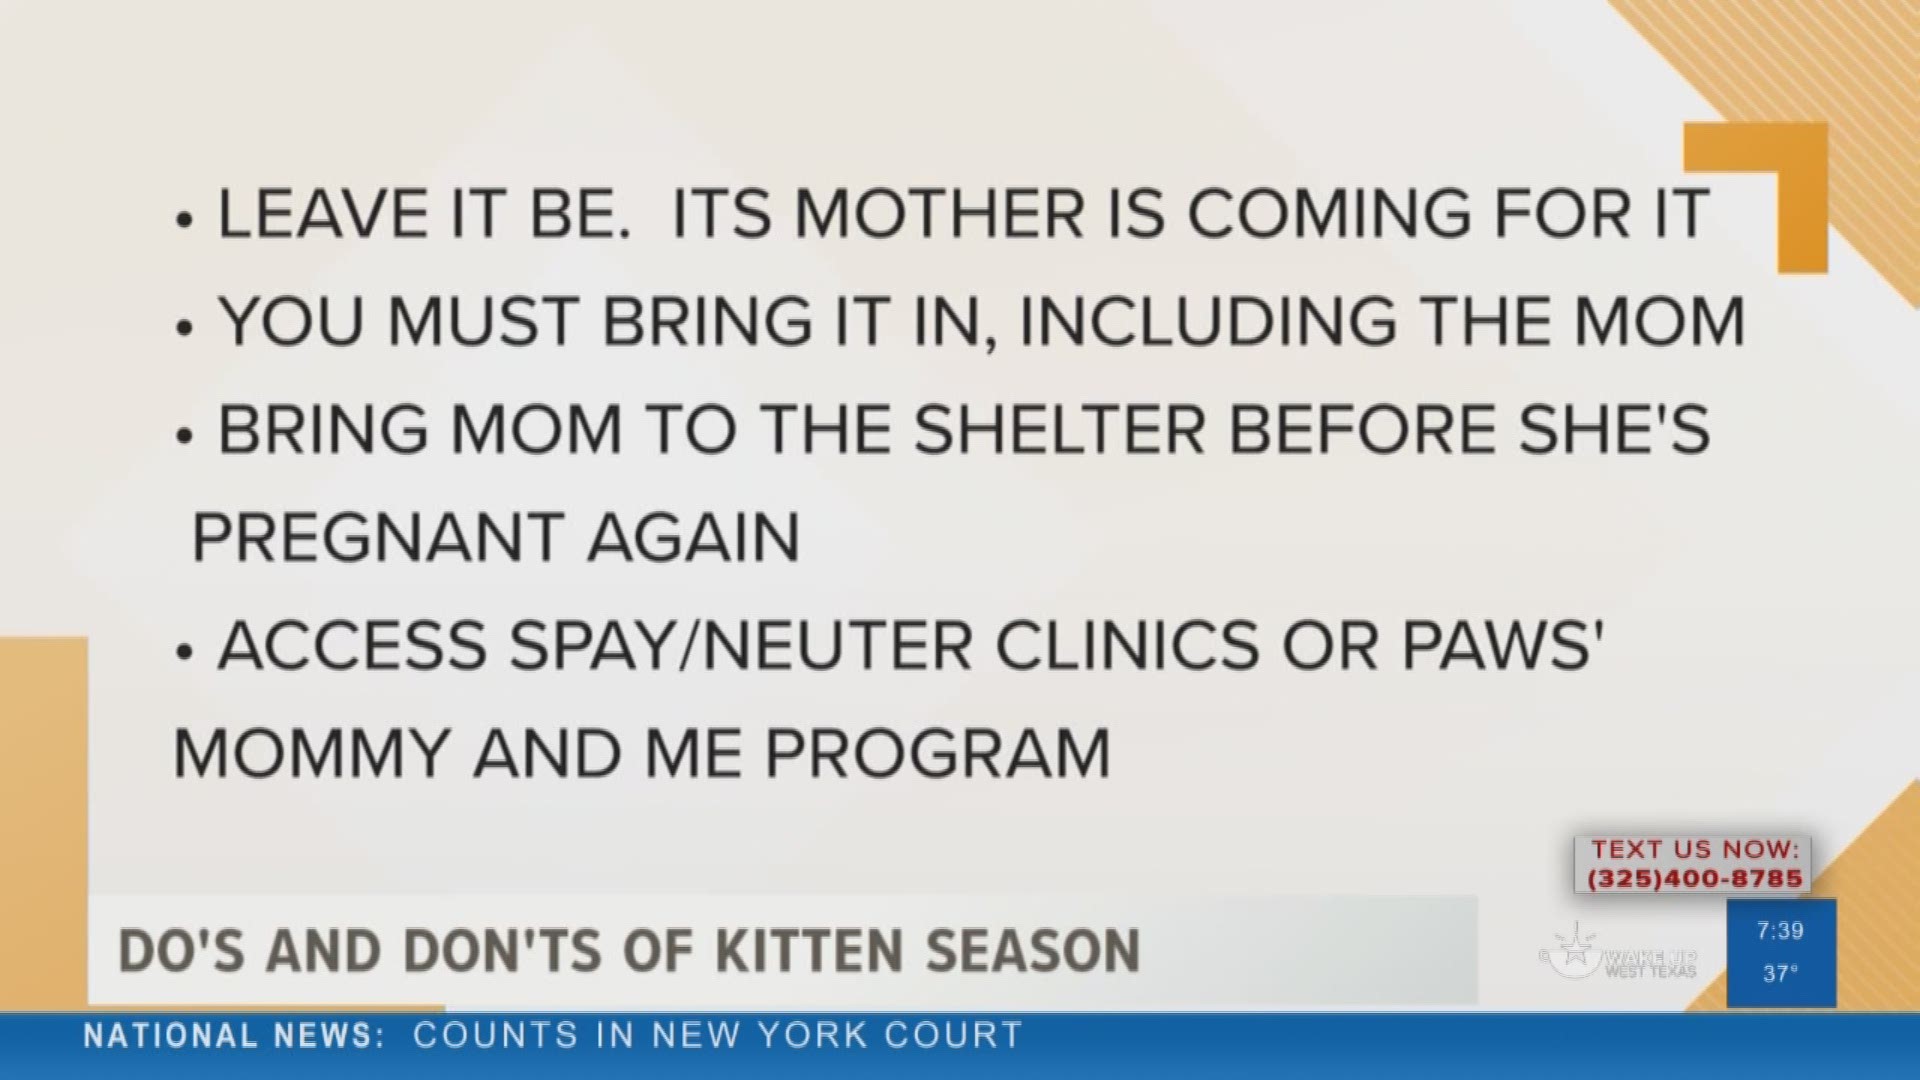 Our Malik Mingo spoke with the City of San Angelo about some tips for kitten season.